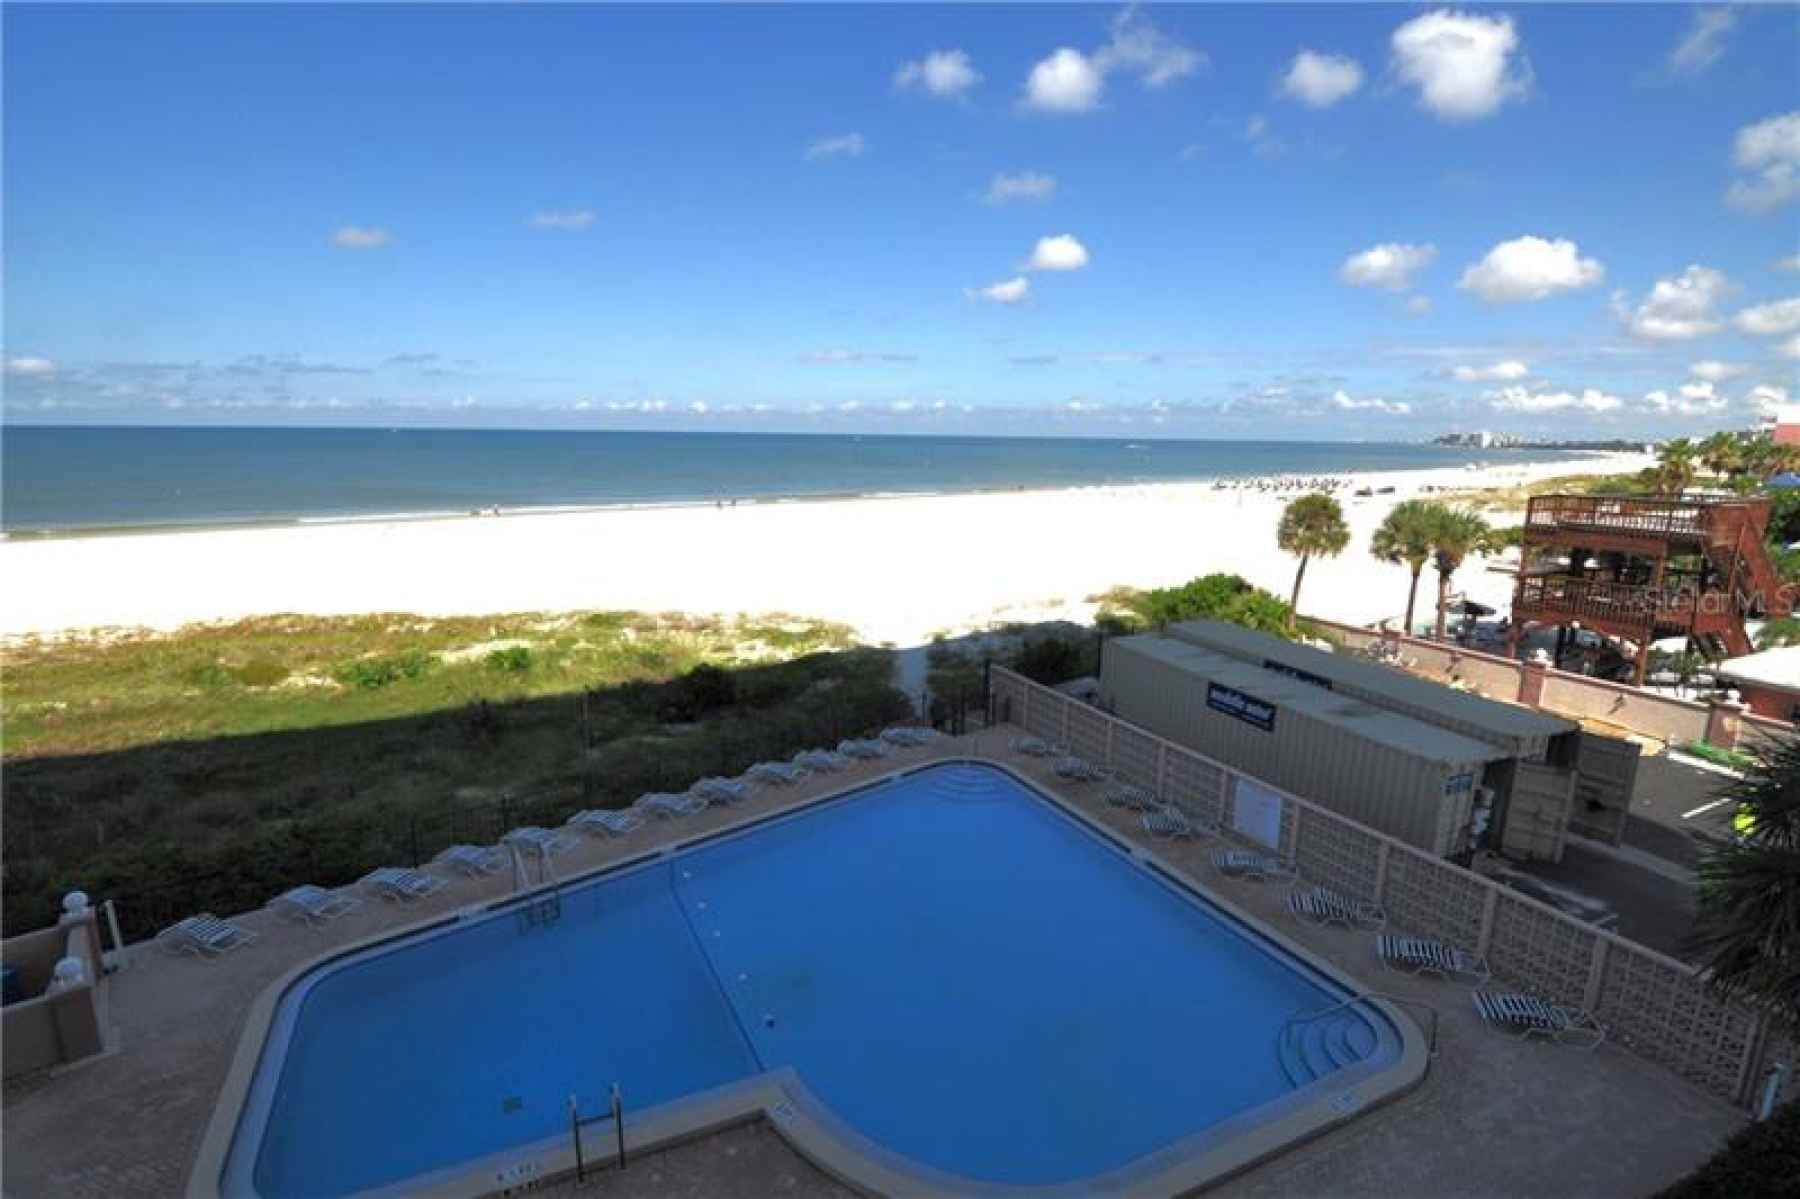 Relax by the beautiful salt water pool or on the expansive Beach on the Gulf